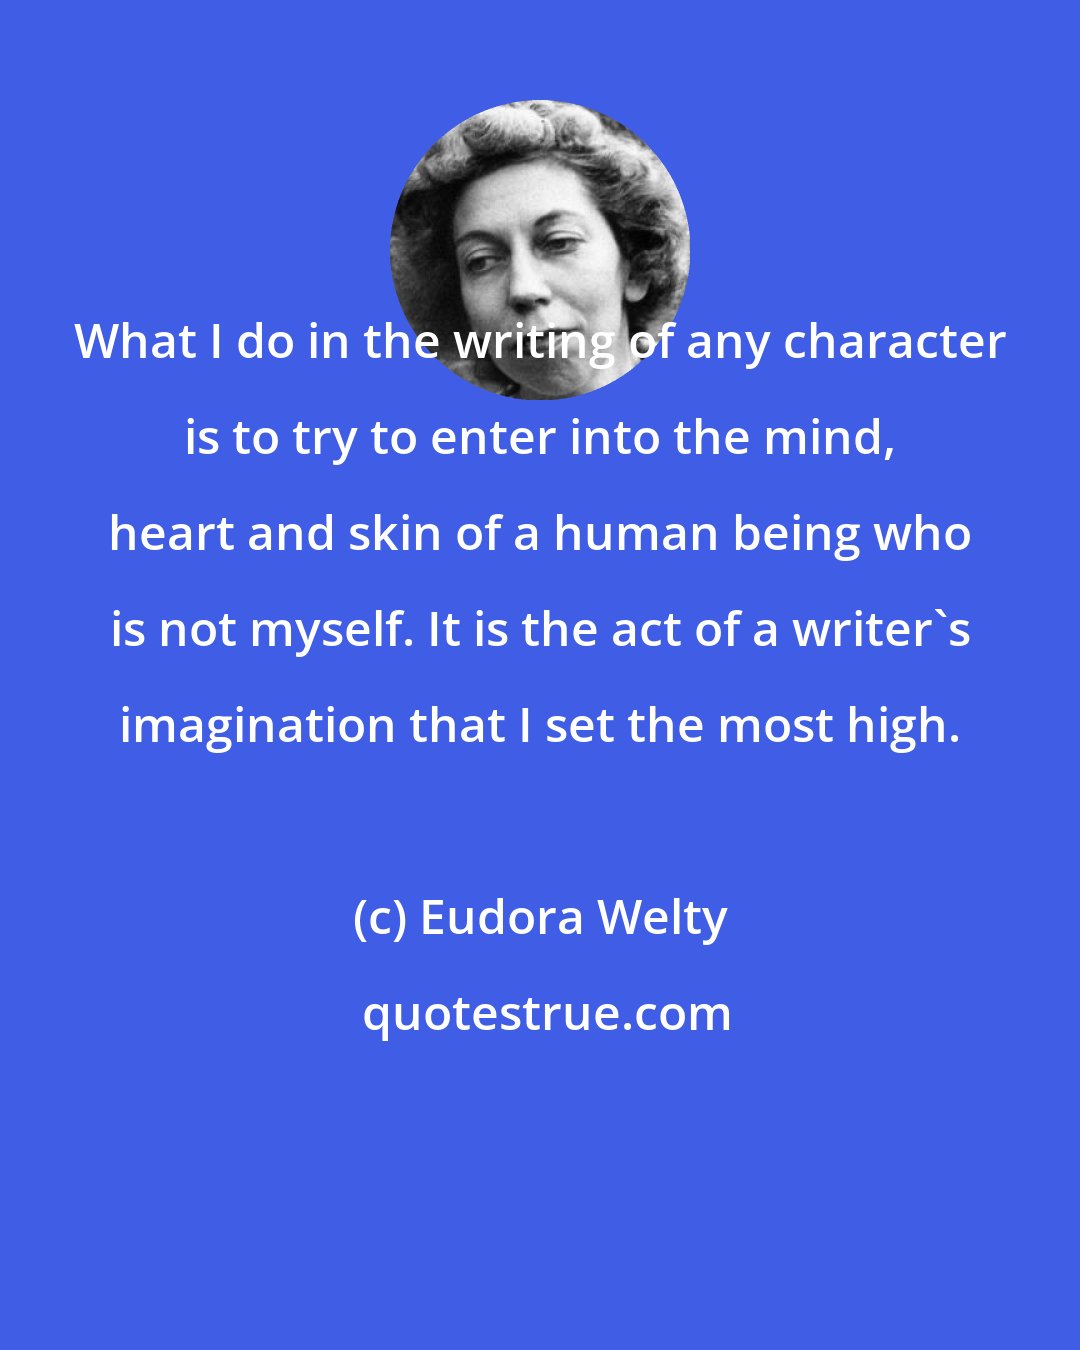 Eudora Welty: What I do in the writing of any character is to try to enter into the mind, heart and skin of a human being who is not myself. It is the act of a writer's imagination that I set the most high.